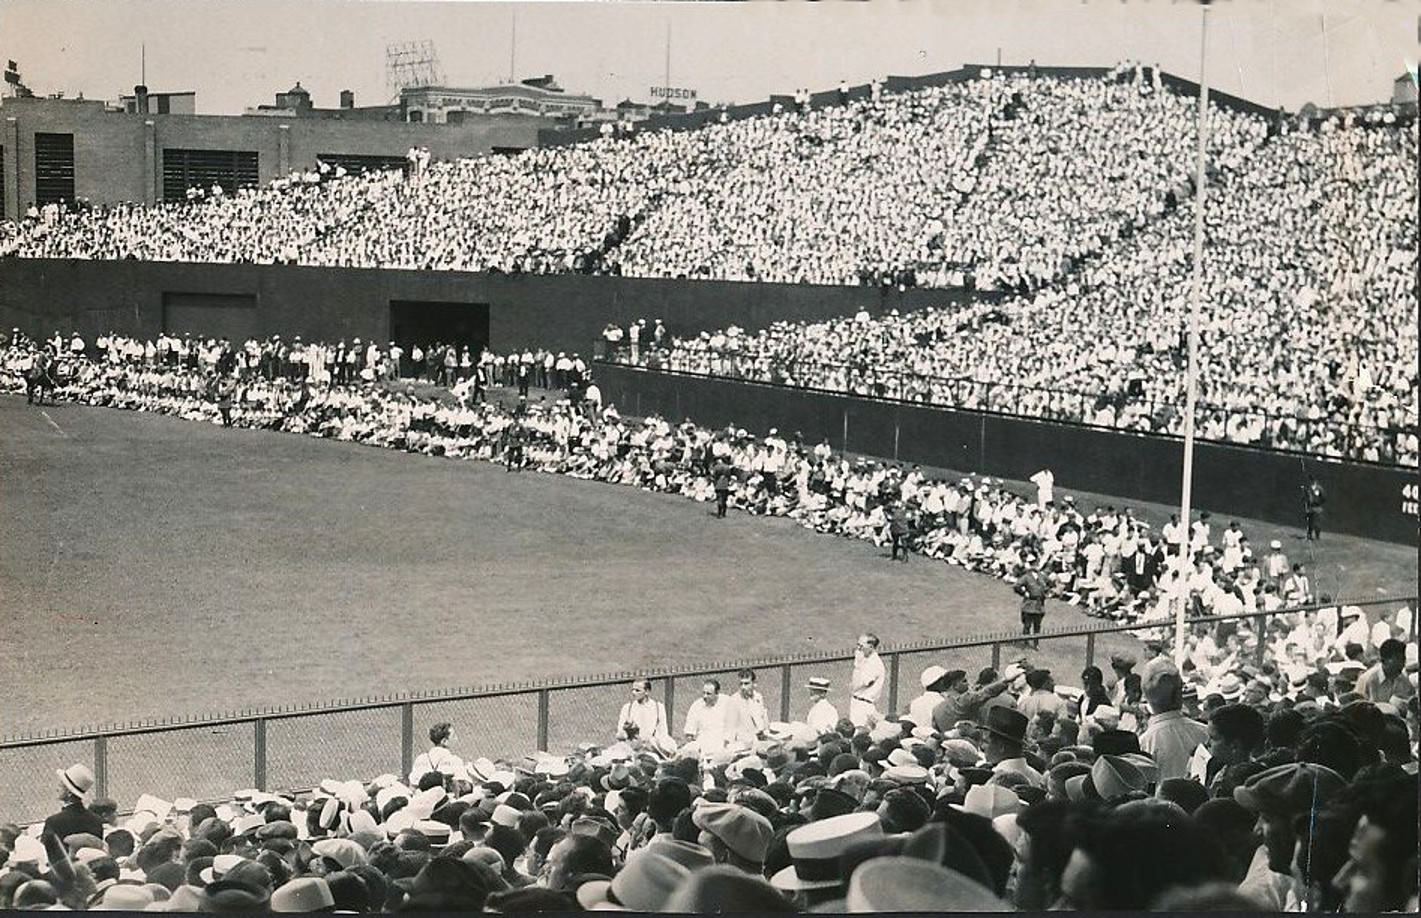 Boston's New Fenway Park overcrowded, some fans are sitting in the outfield, 1934